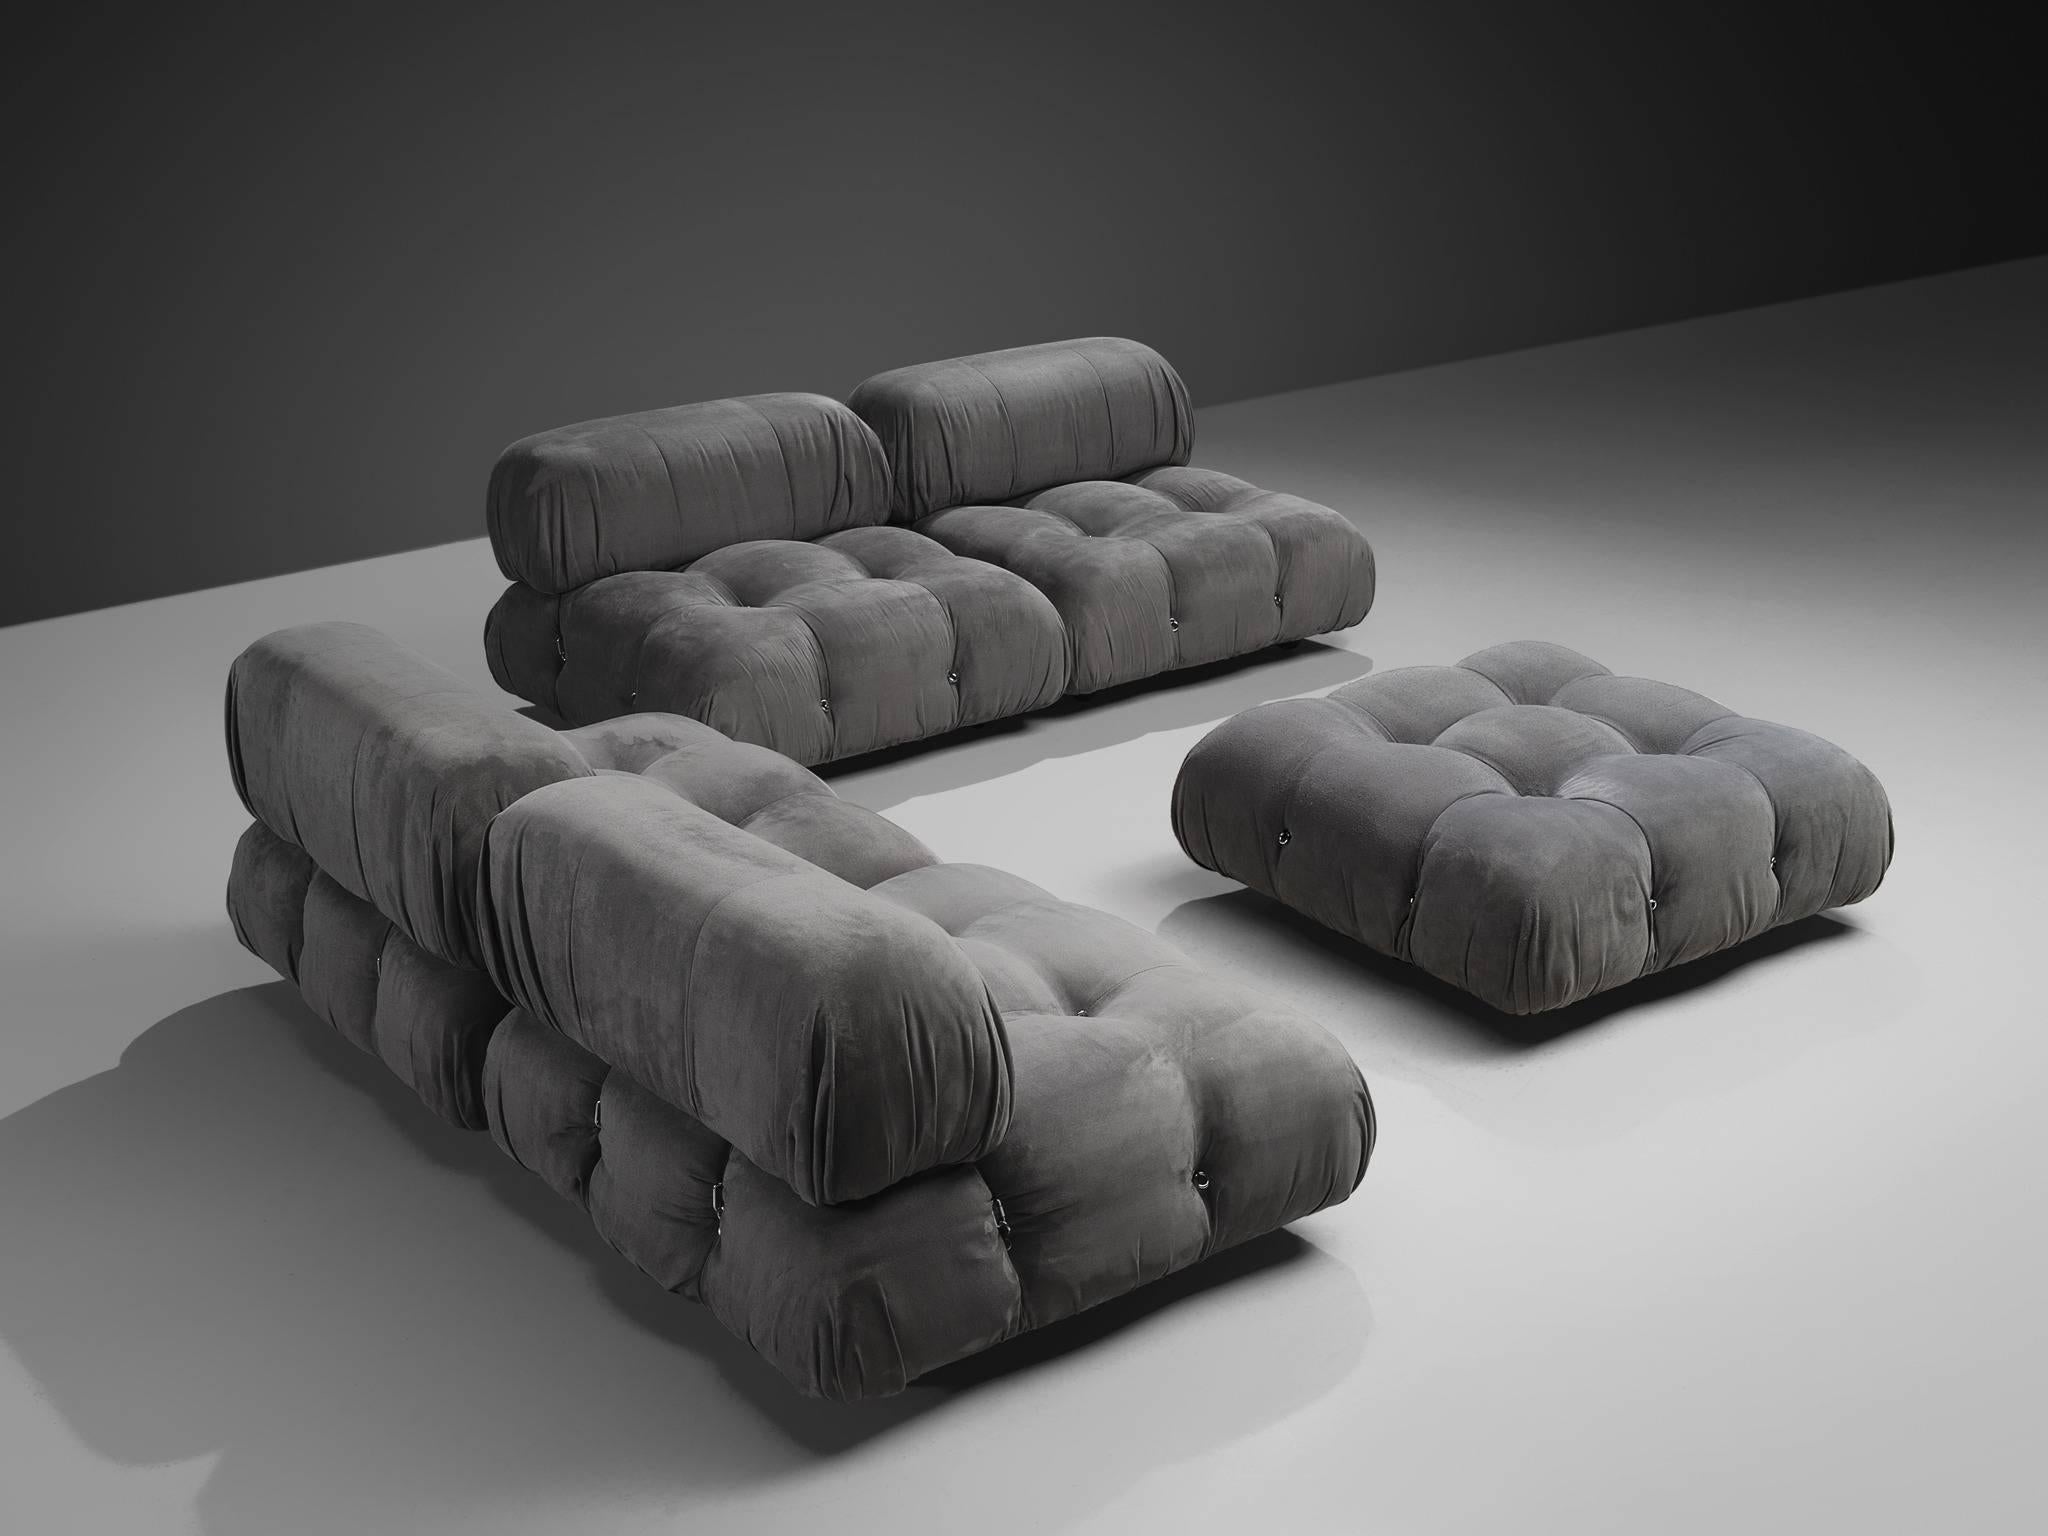 Mario Bellini, large modular 'Camaleonda' sofa in original grey alcantara upholstery, Italy 1972.

The five sectional elements of this can be used freely and apart from one another. The backs and armrests are provided with rings and carabiners,